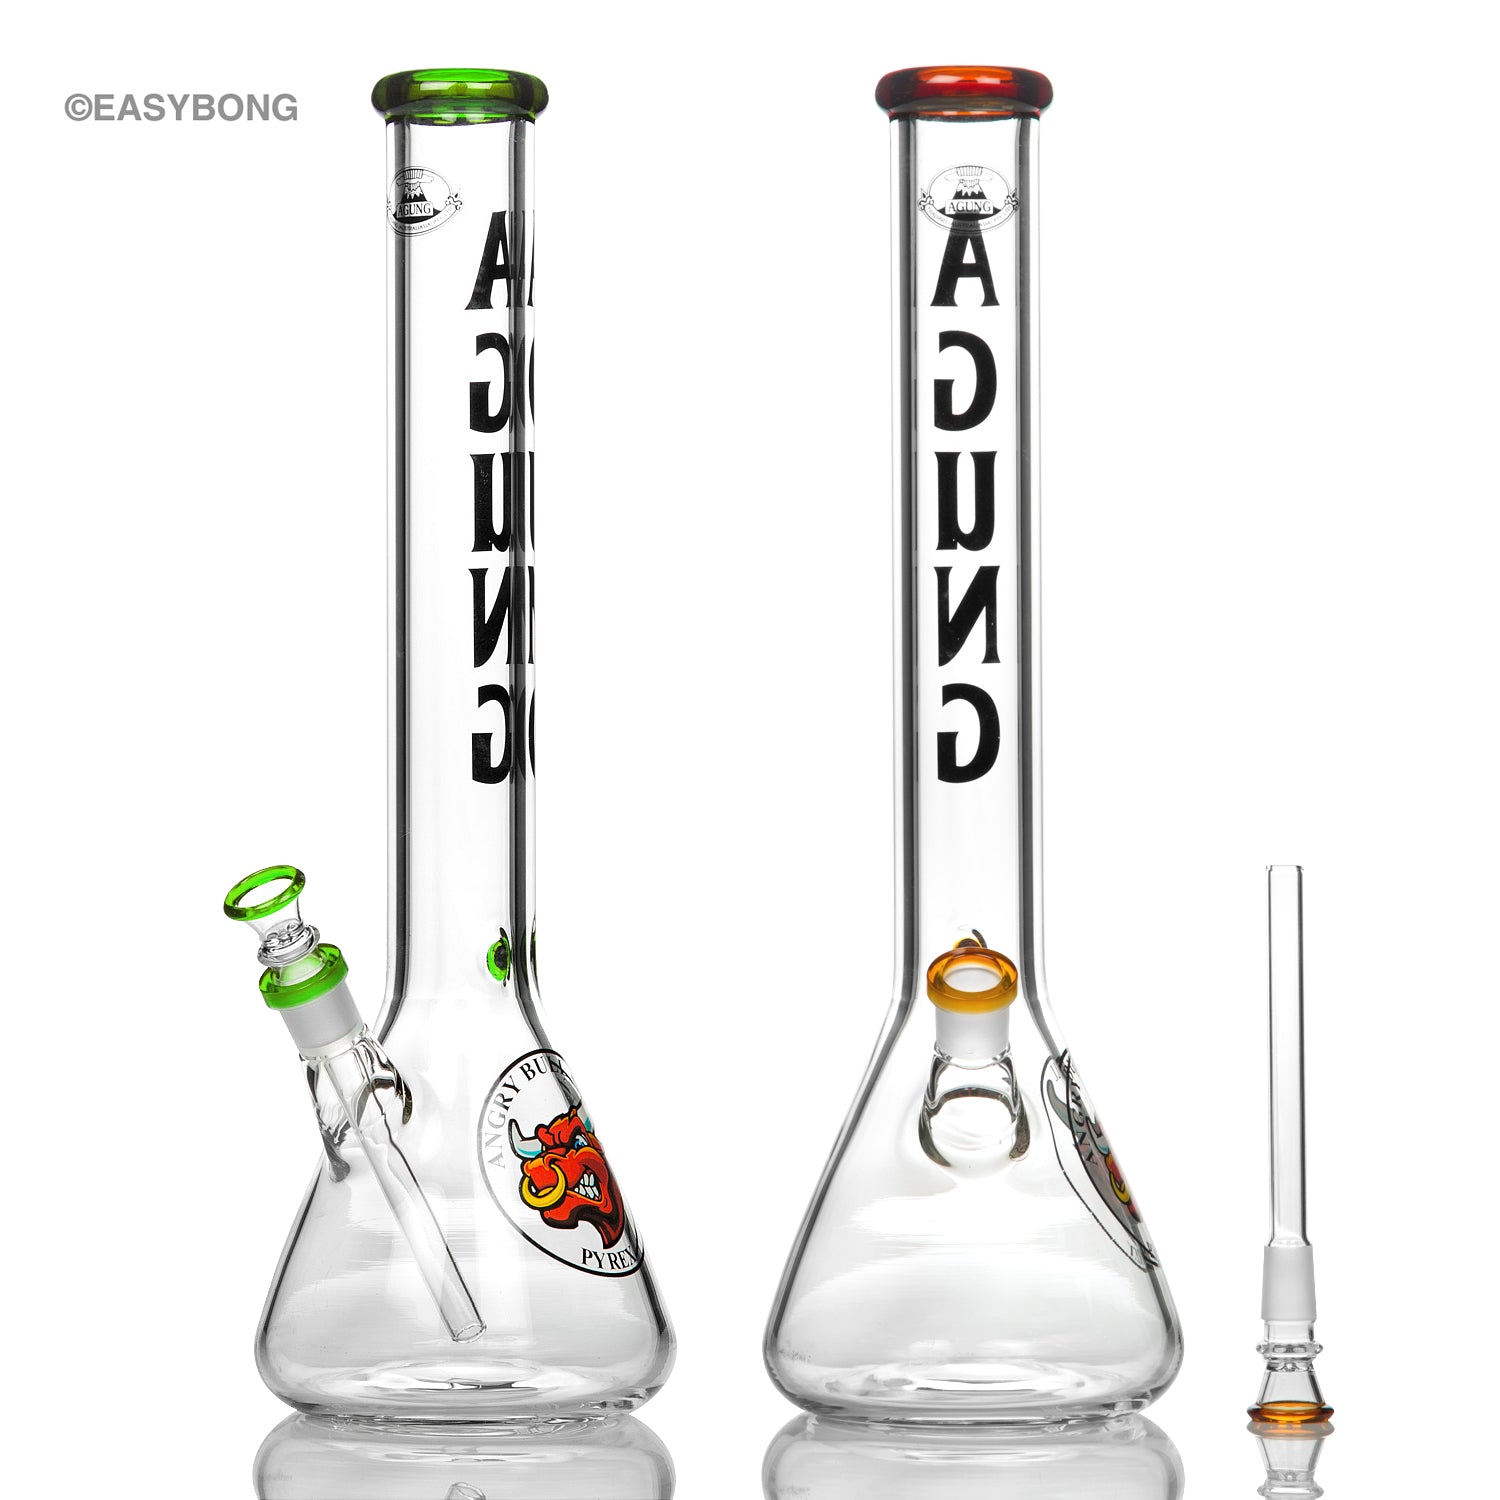 Agung angry bull beaker bongs and waterpipes all glass with 18mm joint.